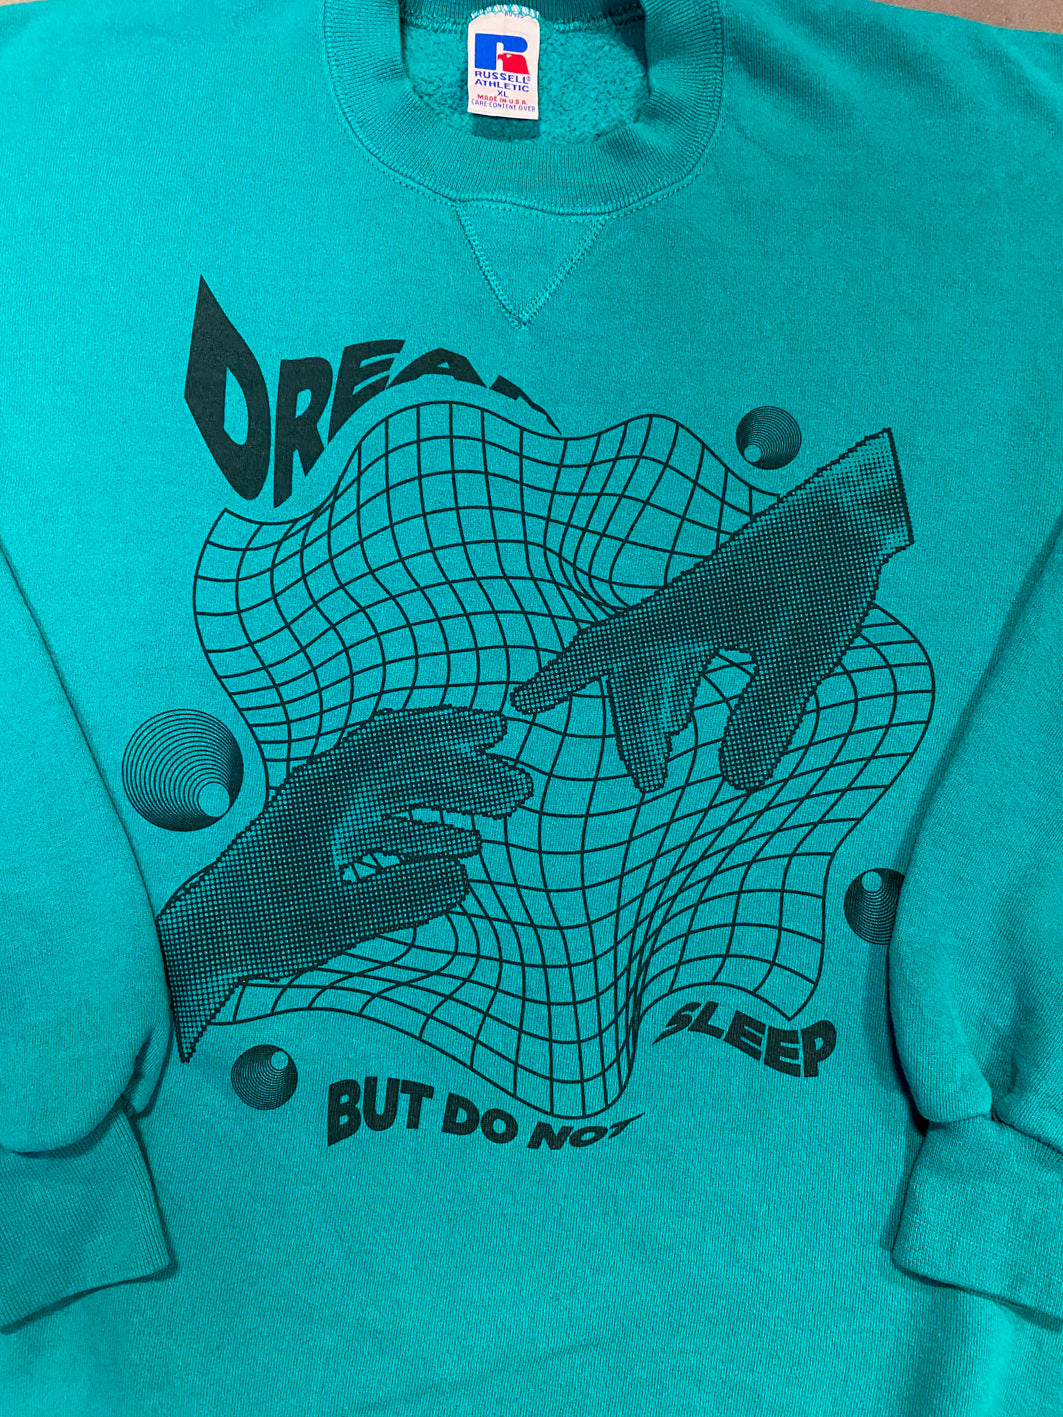 Reworked Russell Athletic Sweatshirt in Turquoise Rave Print